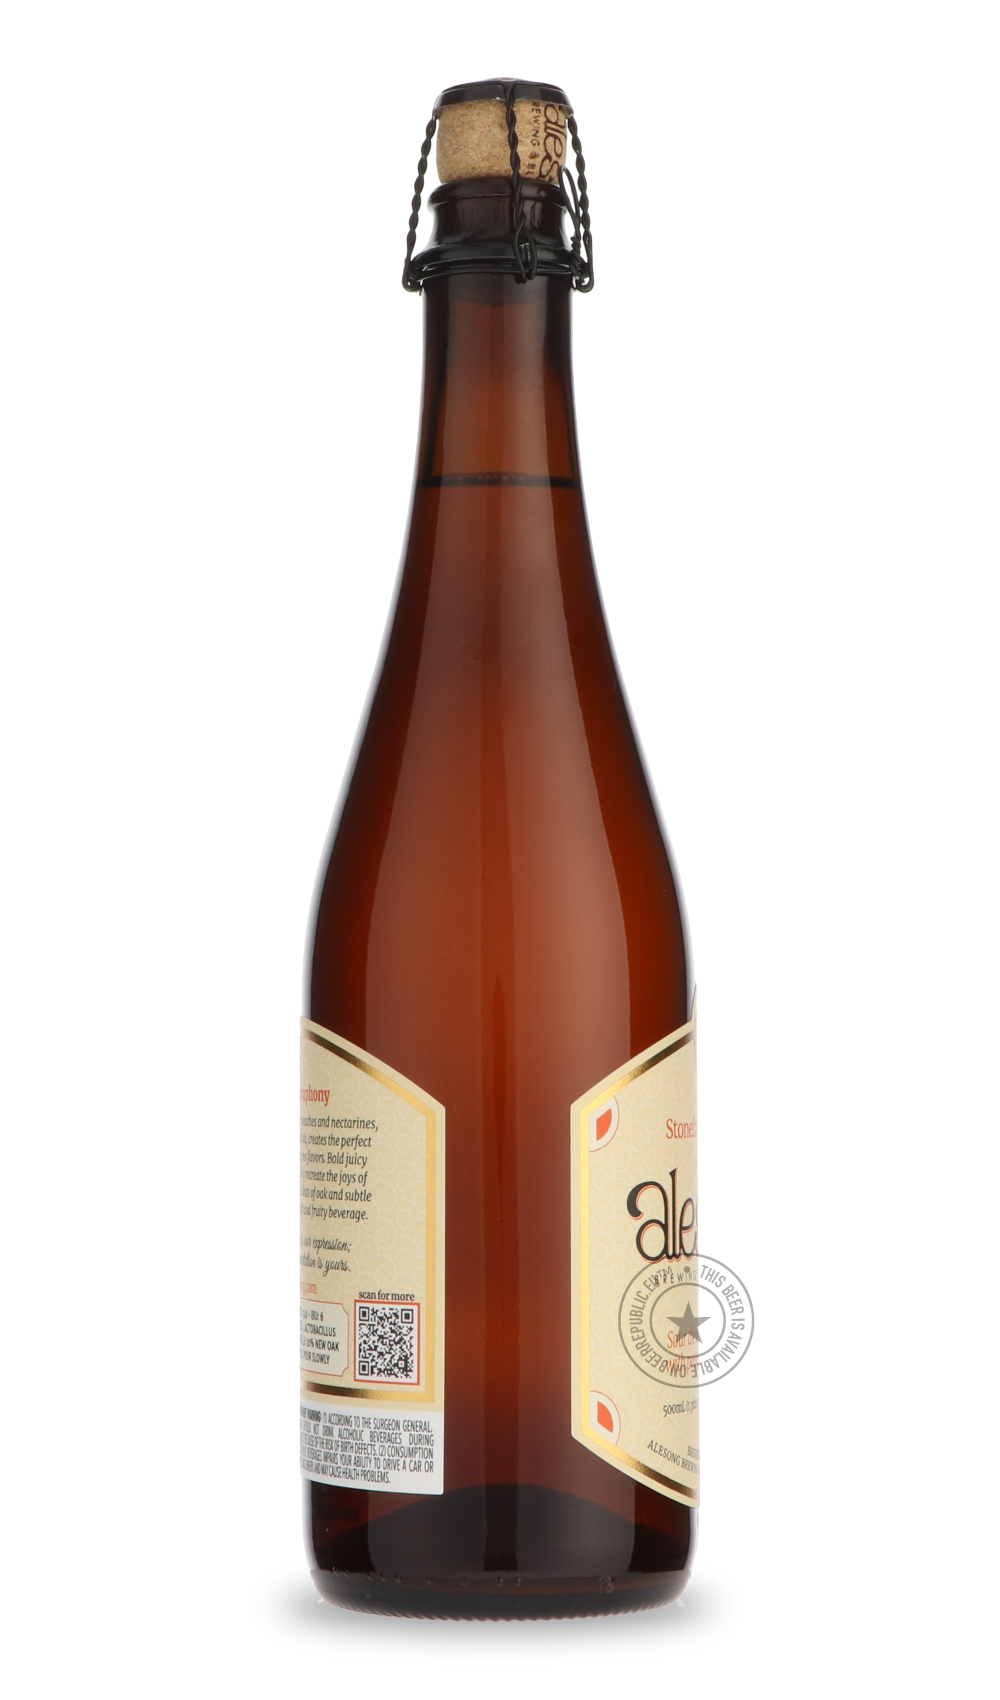 -Alesong- Stonefruit Symphony 2021-Sour / Wild & Fruity- Only @ Beer Republic - The best online beer store for American & Canadian craft beer - Buy beer online from the USA and Canada - Bier online kopen - Amerikaans bier kopen - Craft beer store - Craft beer kopen - Amerikanisch bier kaufen - Bier online kaufen - Acheter biere online - IPA - Stout - Porter - New England IPA - Hazy IPA - Imperial Stout - Barrel Aged - Barrel Aged Imperial Stout - Brown - Dark beer - Blond - Blonde - Pilsner - Lager - Wheat 